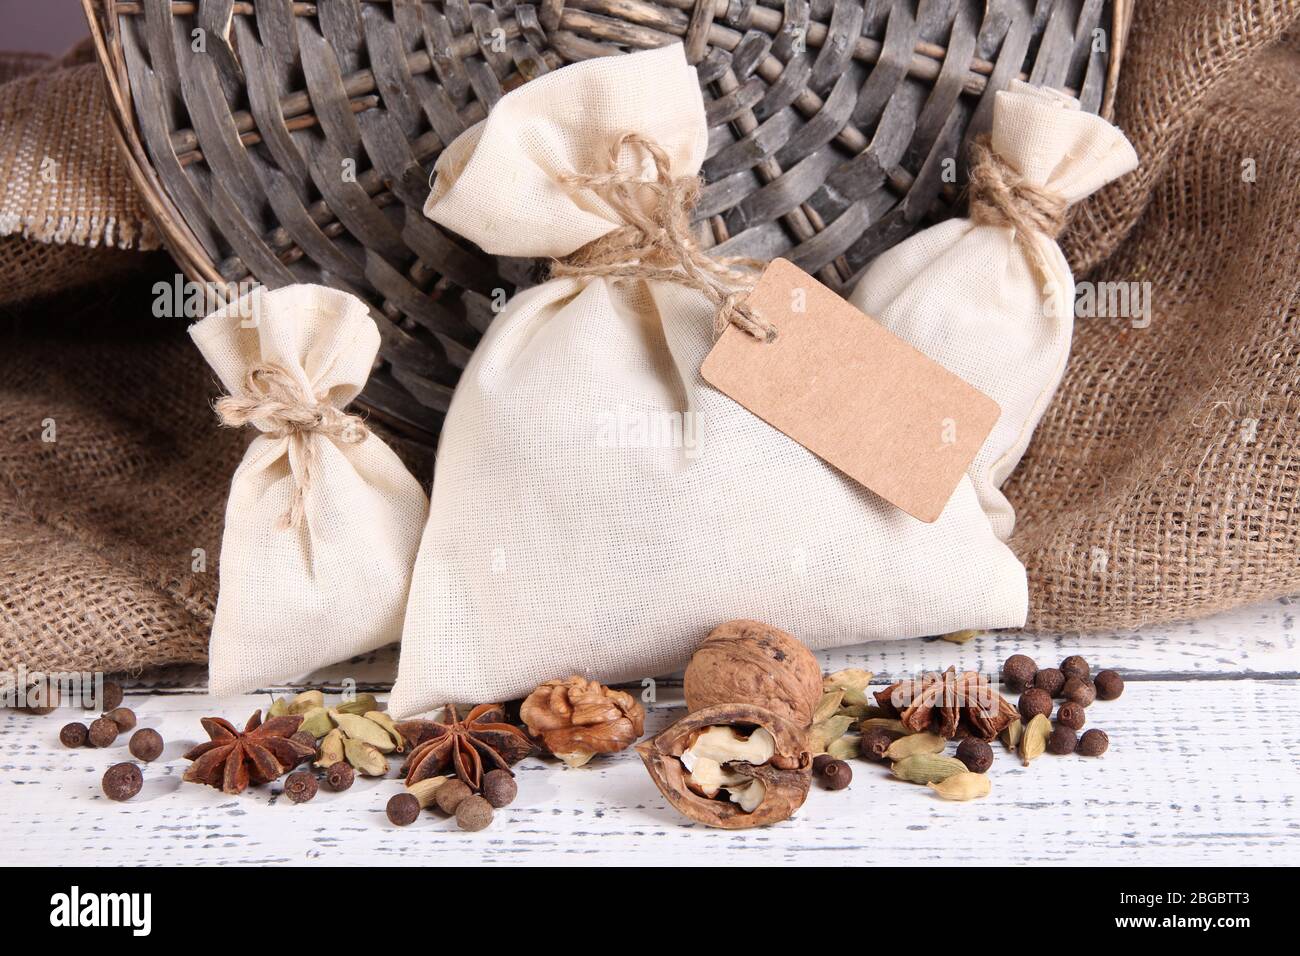 Sacks full with spices, on wooden table, on sackcloth background Stock Photo